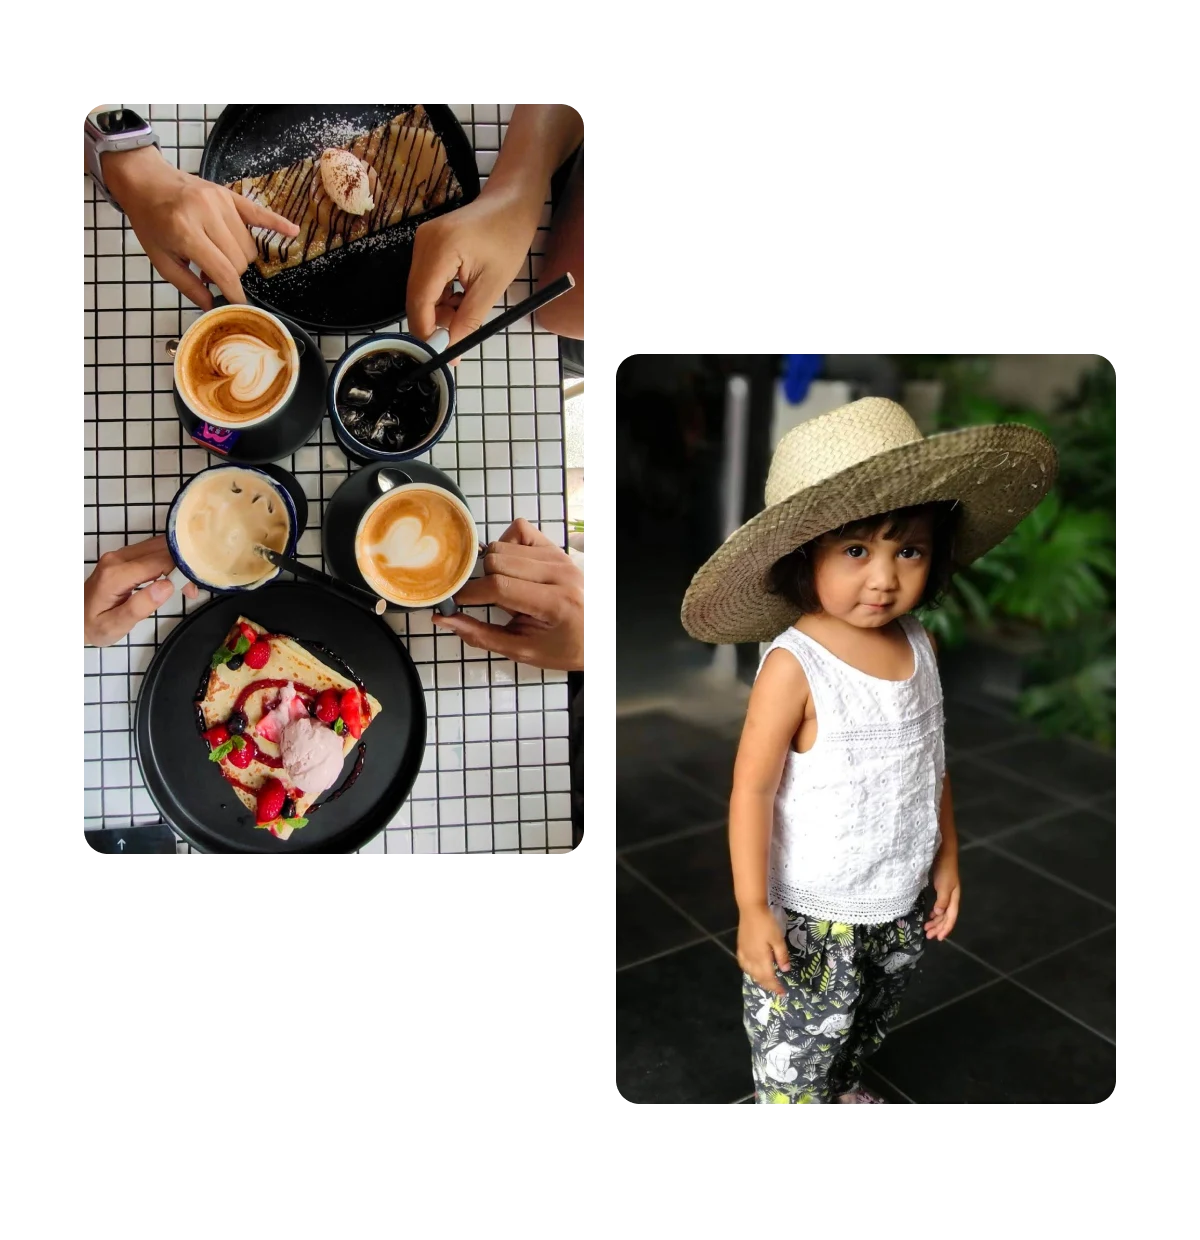 Two pins, overhead view of people sharing coffee and treats, young girl in straw hat